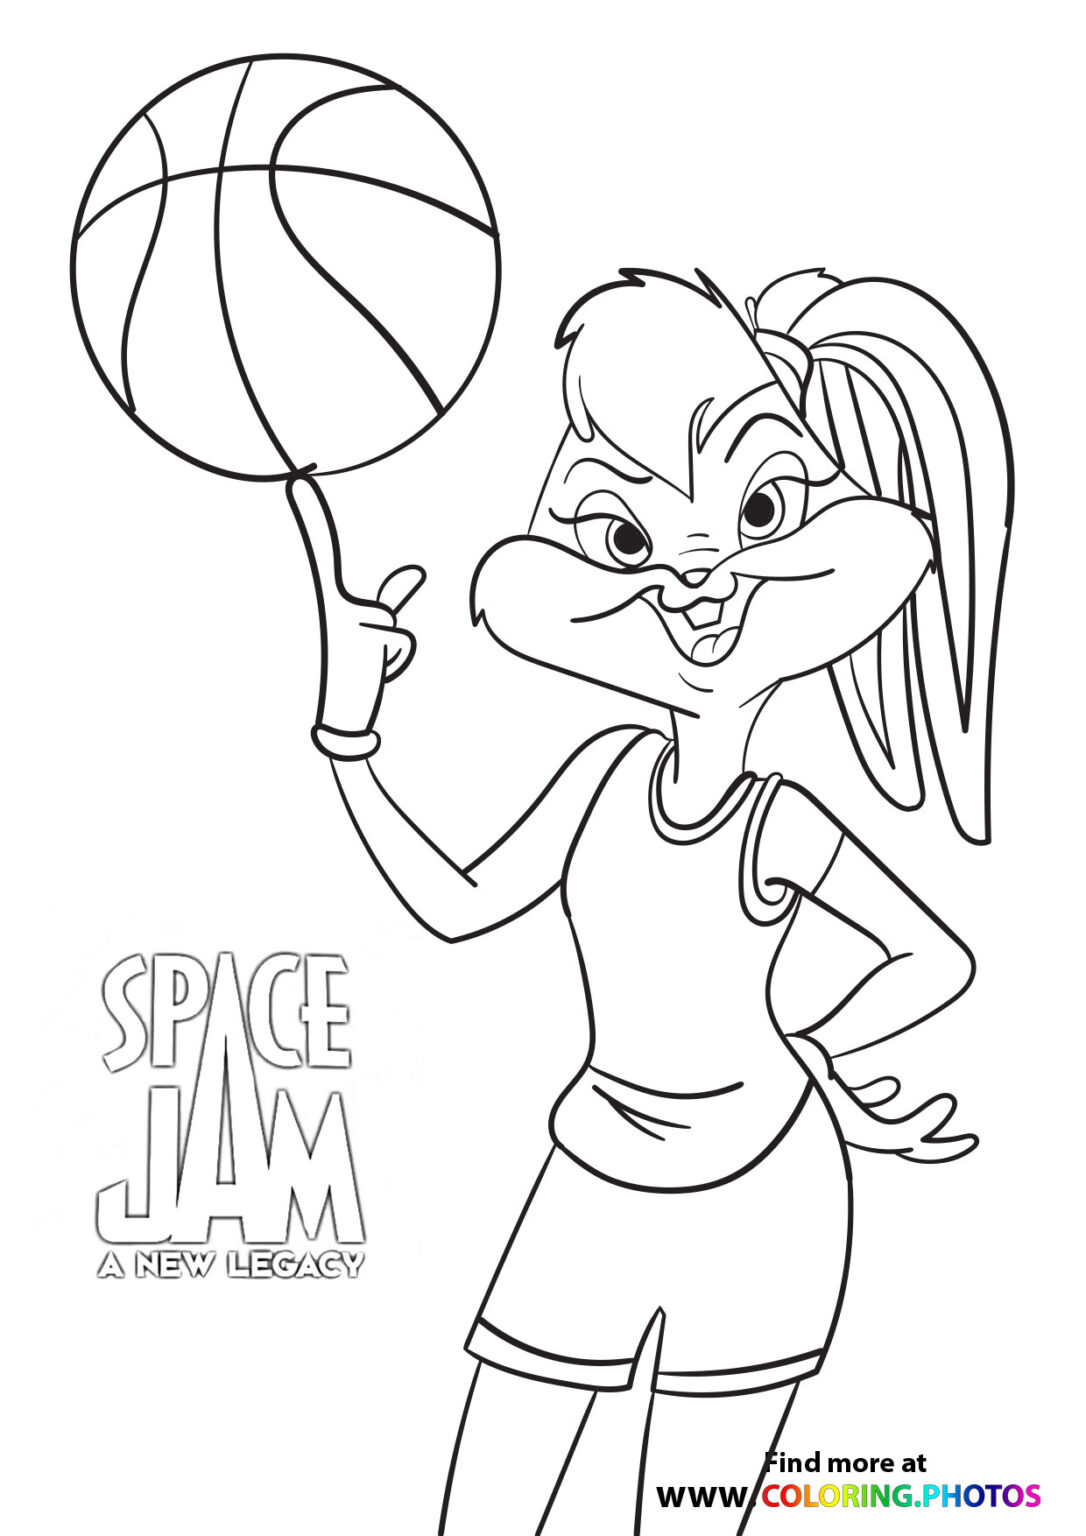 free-printable-space-jam-a-new-legacy-coloring-pages-space-jam-daffy